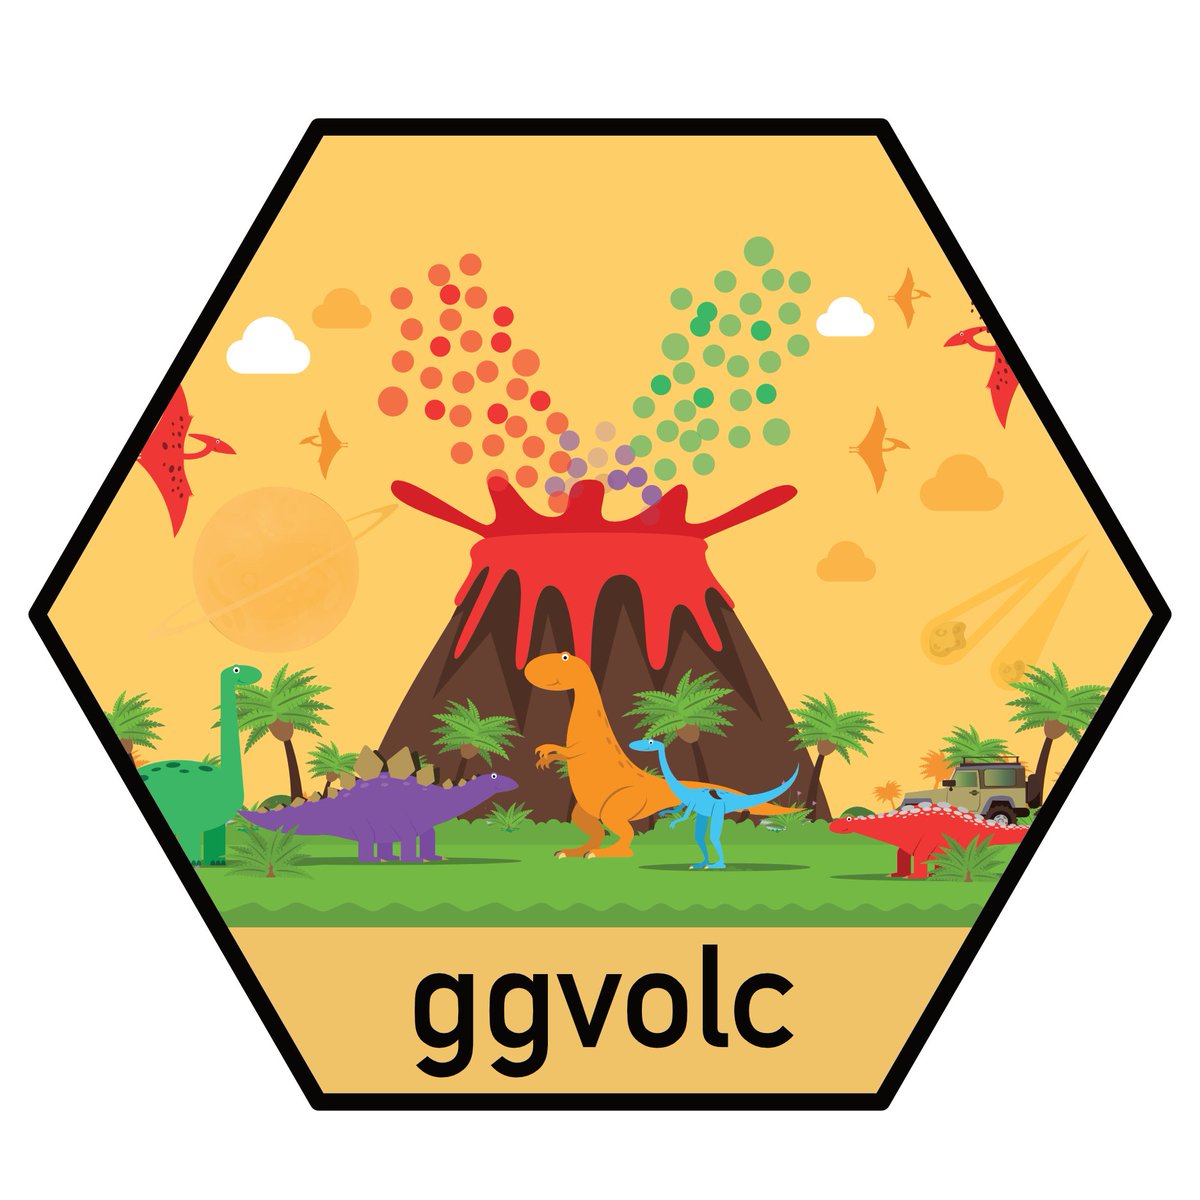 Excited to introduce #ggvloc! 🎉 For everyone working with differential expression datasets & RNAseq data, this can be a game-changer. Visualize & highlight genes of interest in just one line of code Check out the package here:github.com/loukesio/ggvolc. Don't forget to give it a ⭐